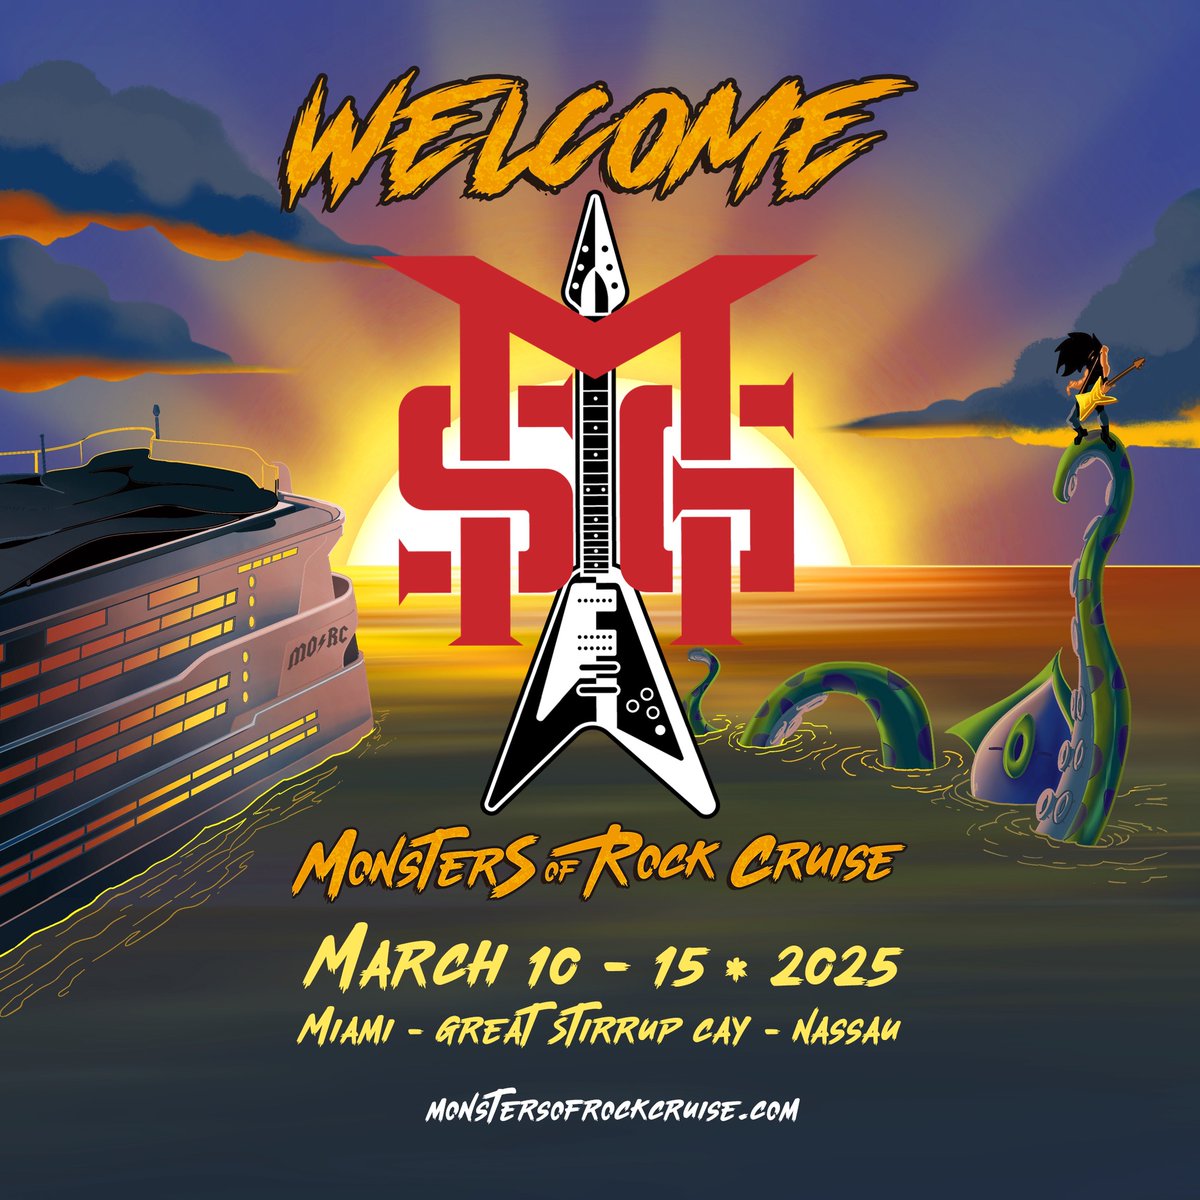 Michael Schenker Group will be aboard the Monsters of Rock Cruise on March 10-15, 2025.
More info & Tickets: monstersofrockcruise.com
#morc2025 #MichaelSchenkerGroup #monstersofrockcruise